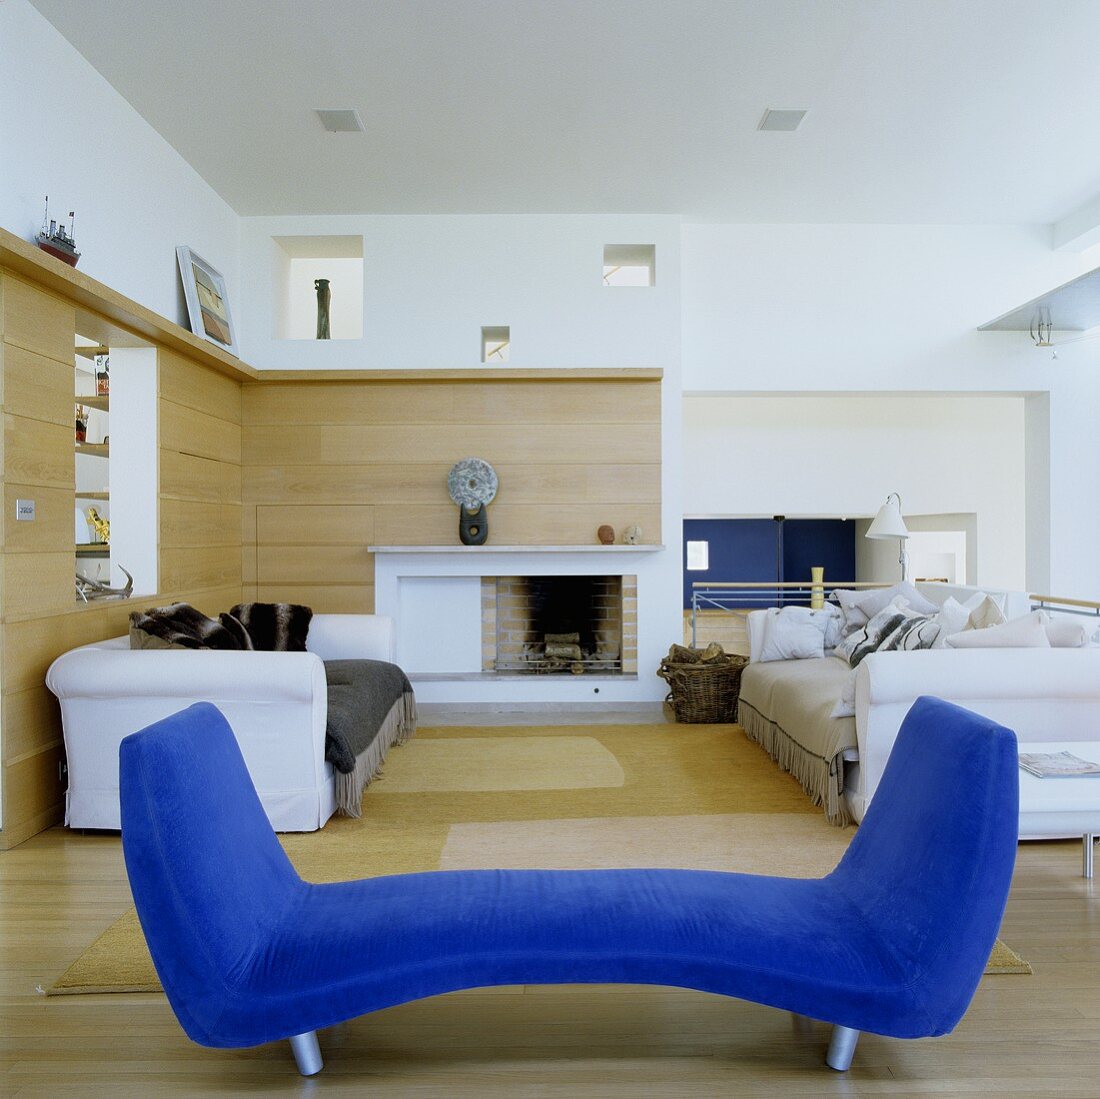 A blue divan and a white sofa set in an open-plan living room with a wood panelled wall and a fireplace